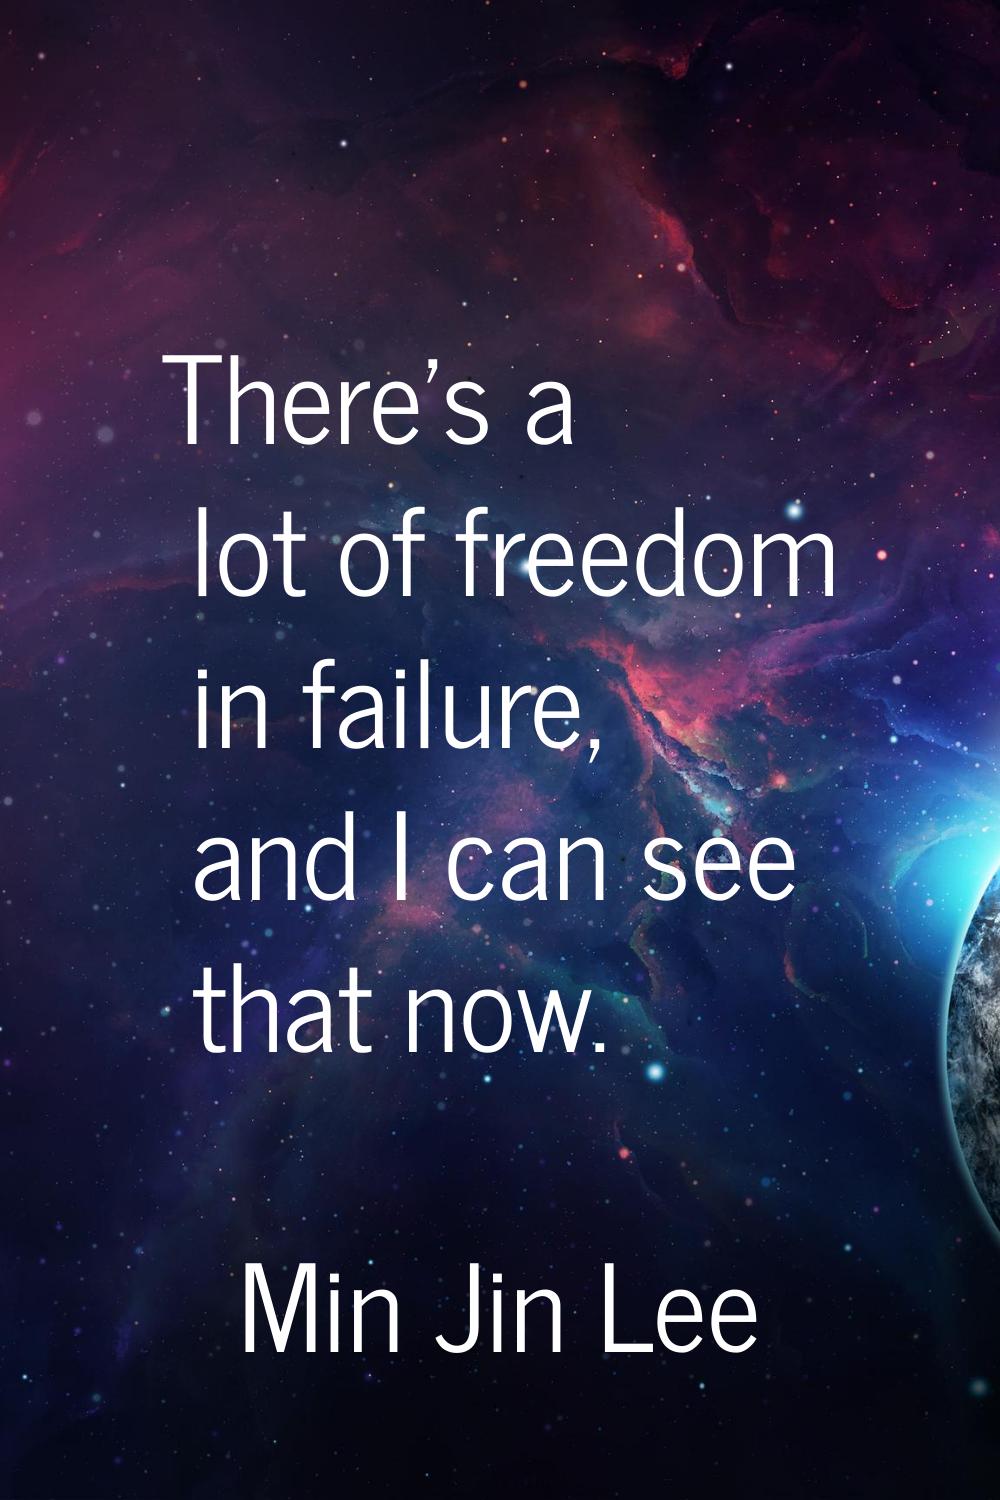 There's a lot of freedom in failure, and I can see that now.